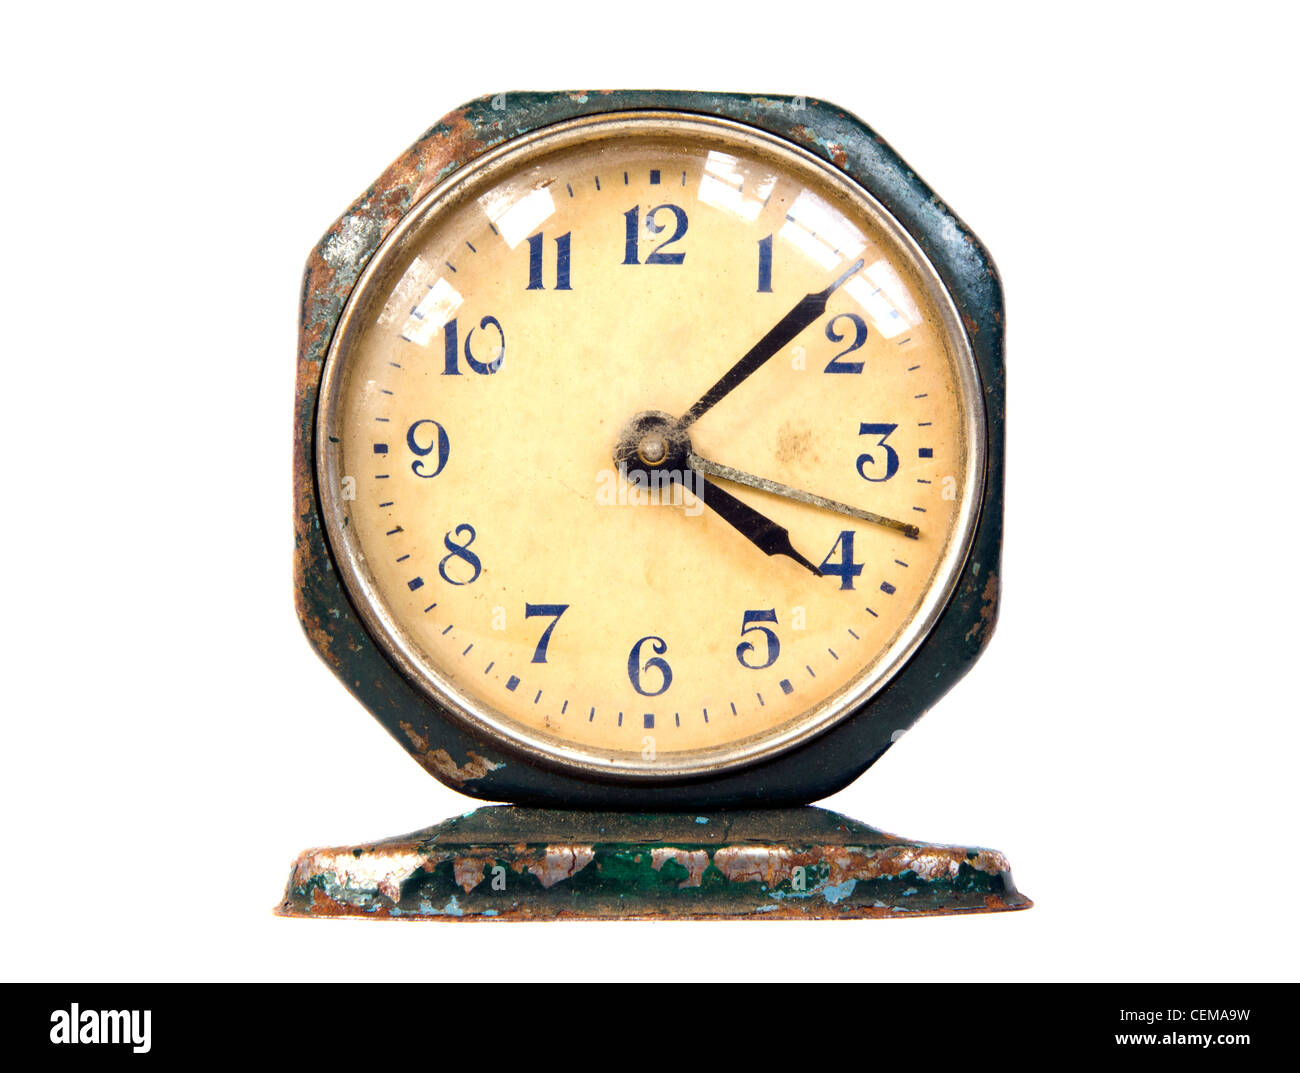 Ancient rusty metal clock. Vintage retro object isolated on white background. Stock Photo